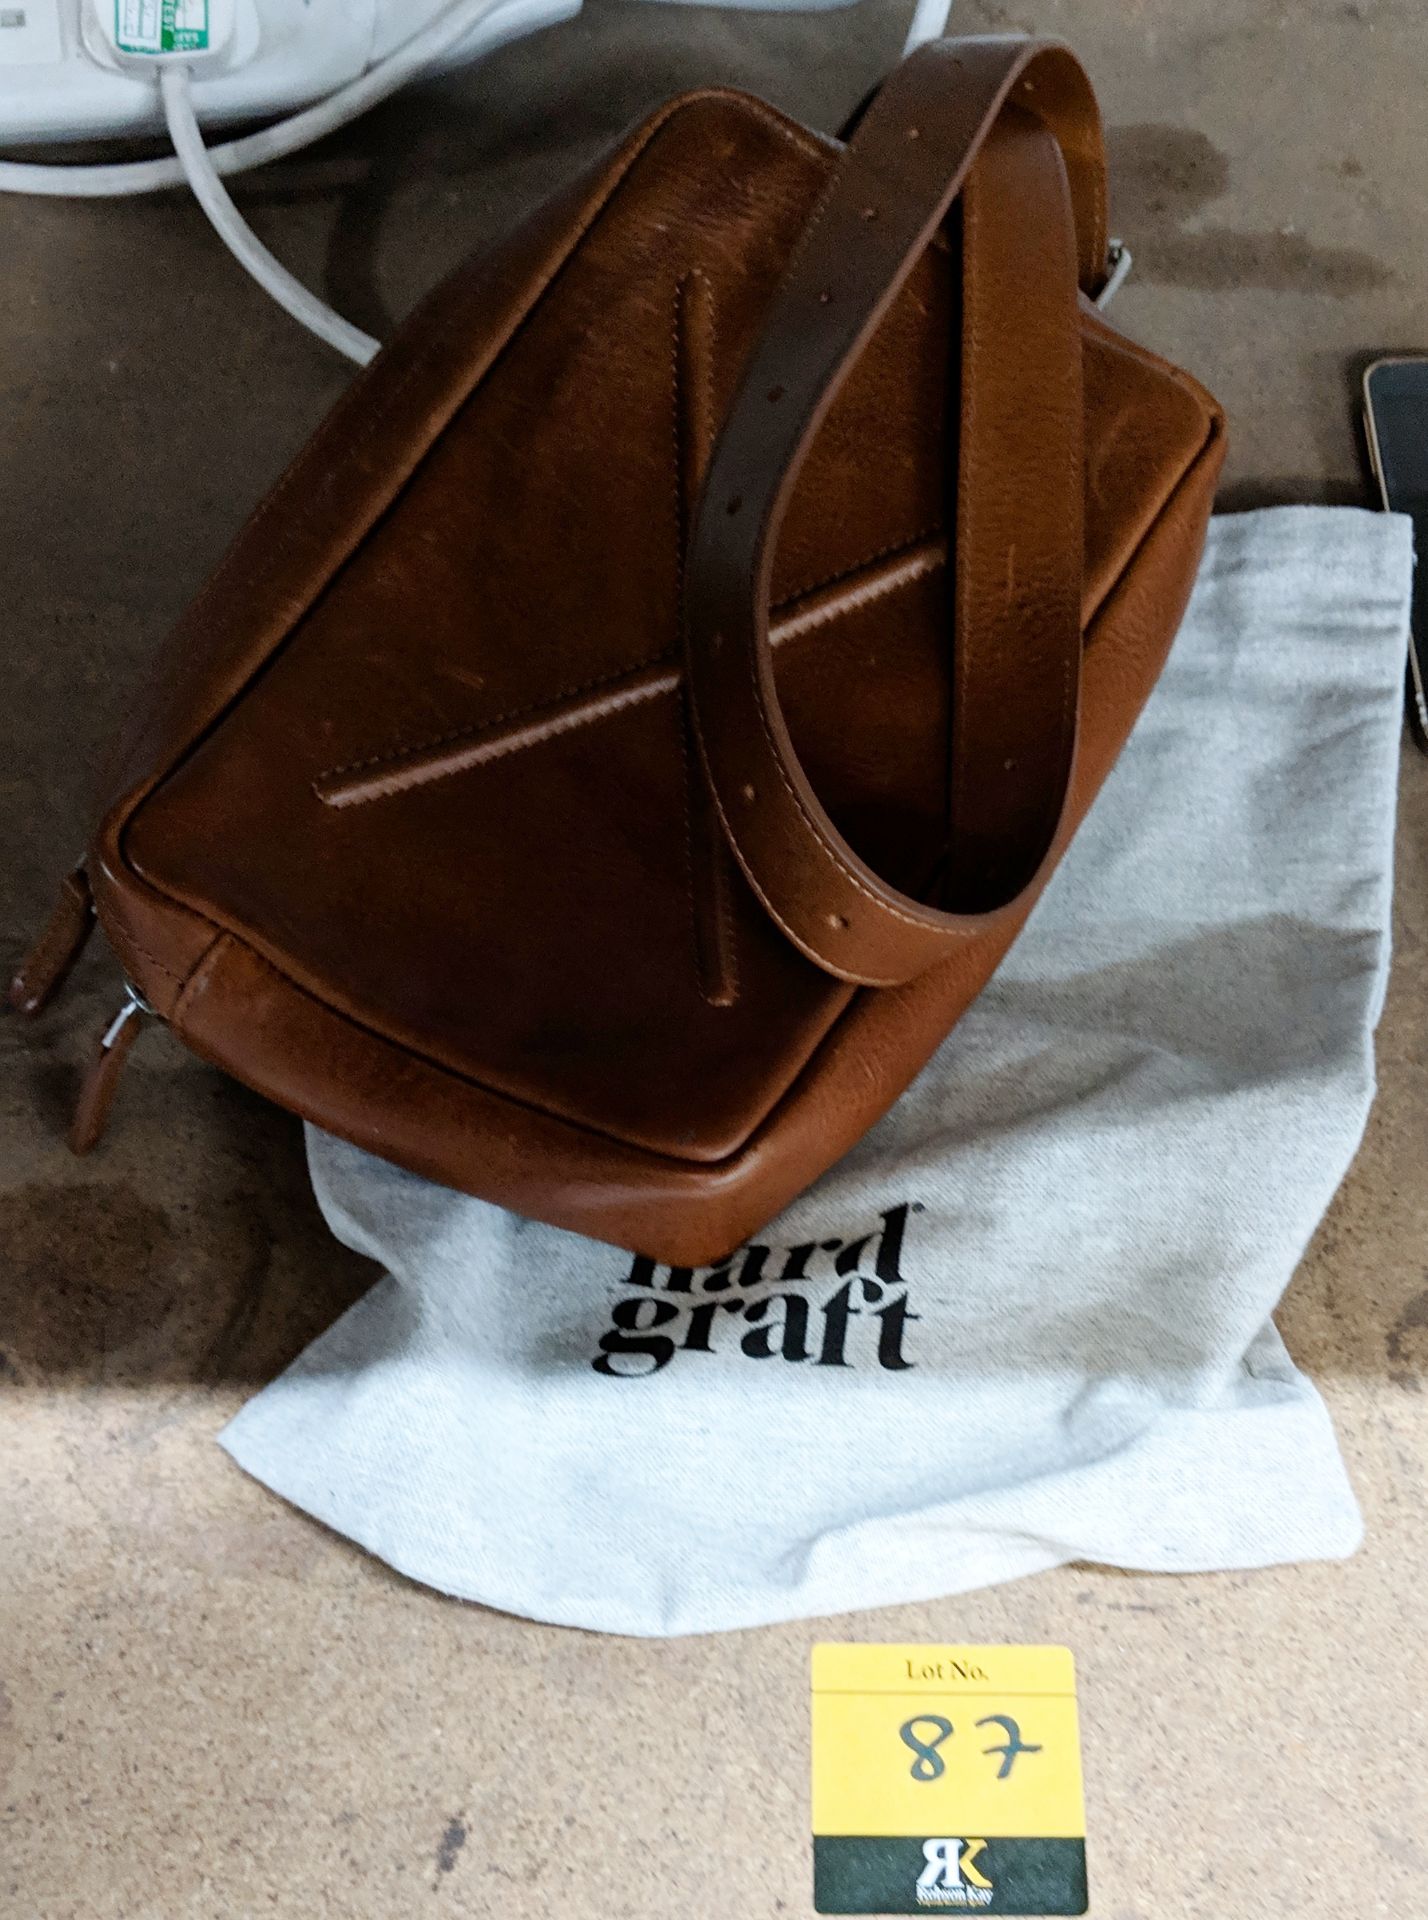 Hard Graft leather "Phone Pack Classic" man bag in brown leather with adjustable strap, including - Image 3 of 8